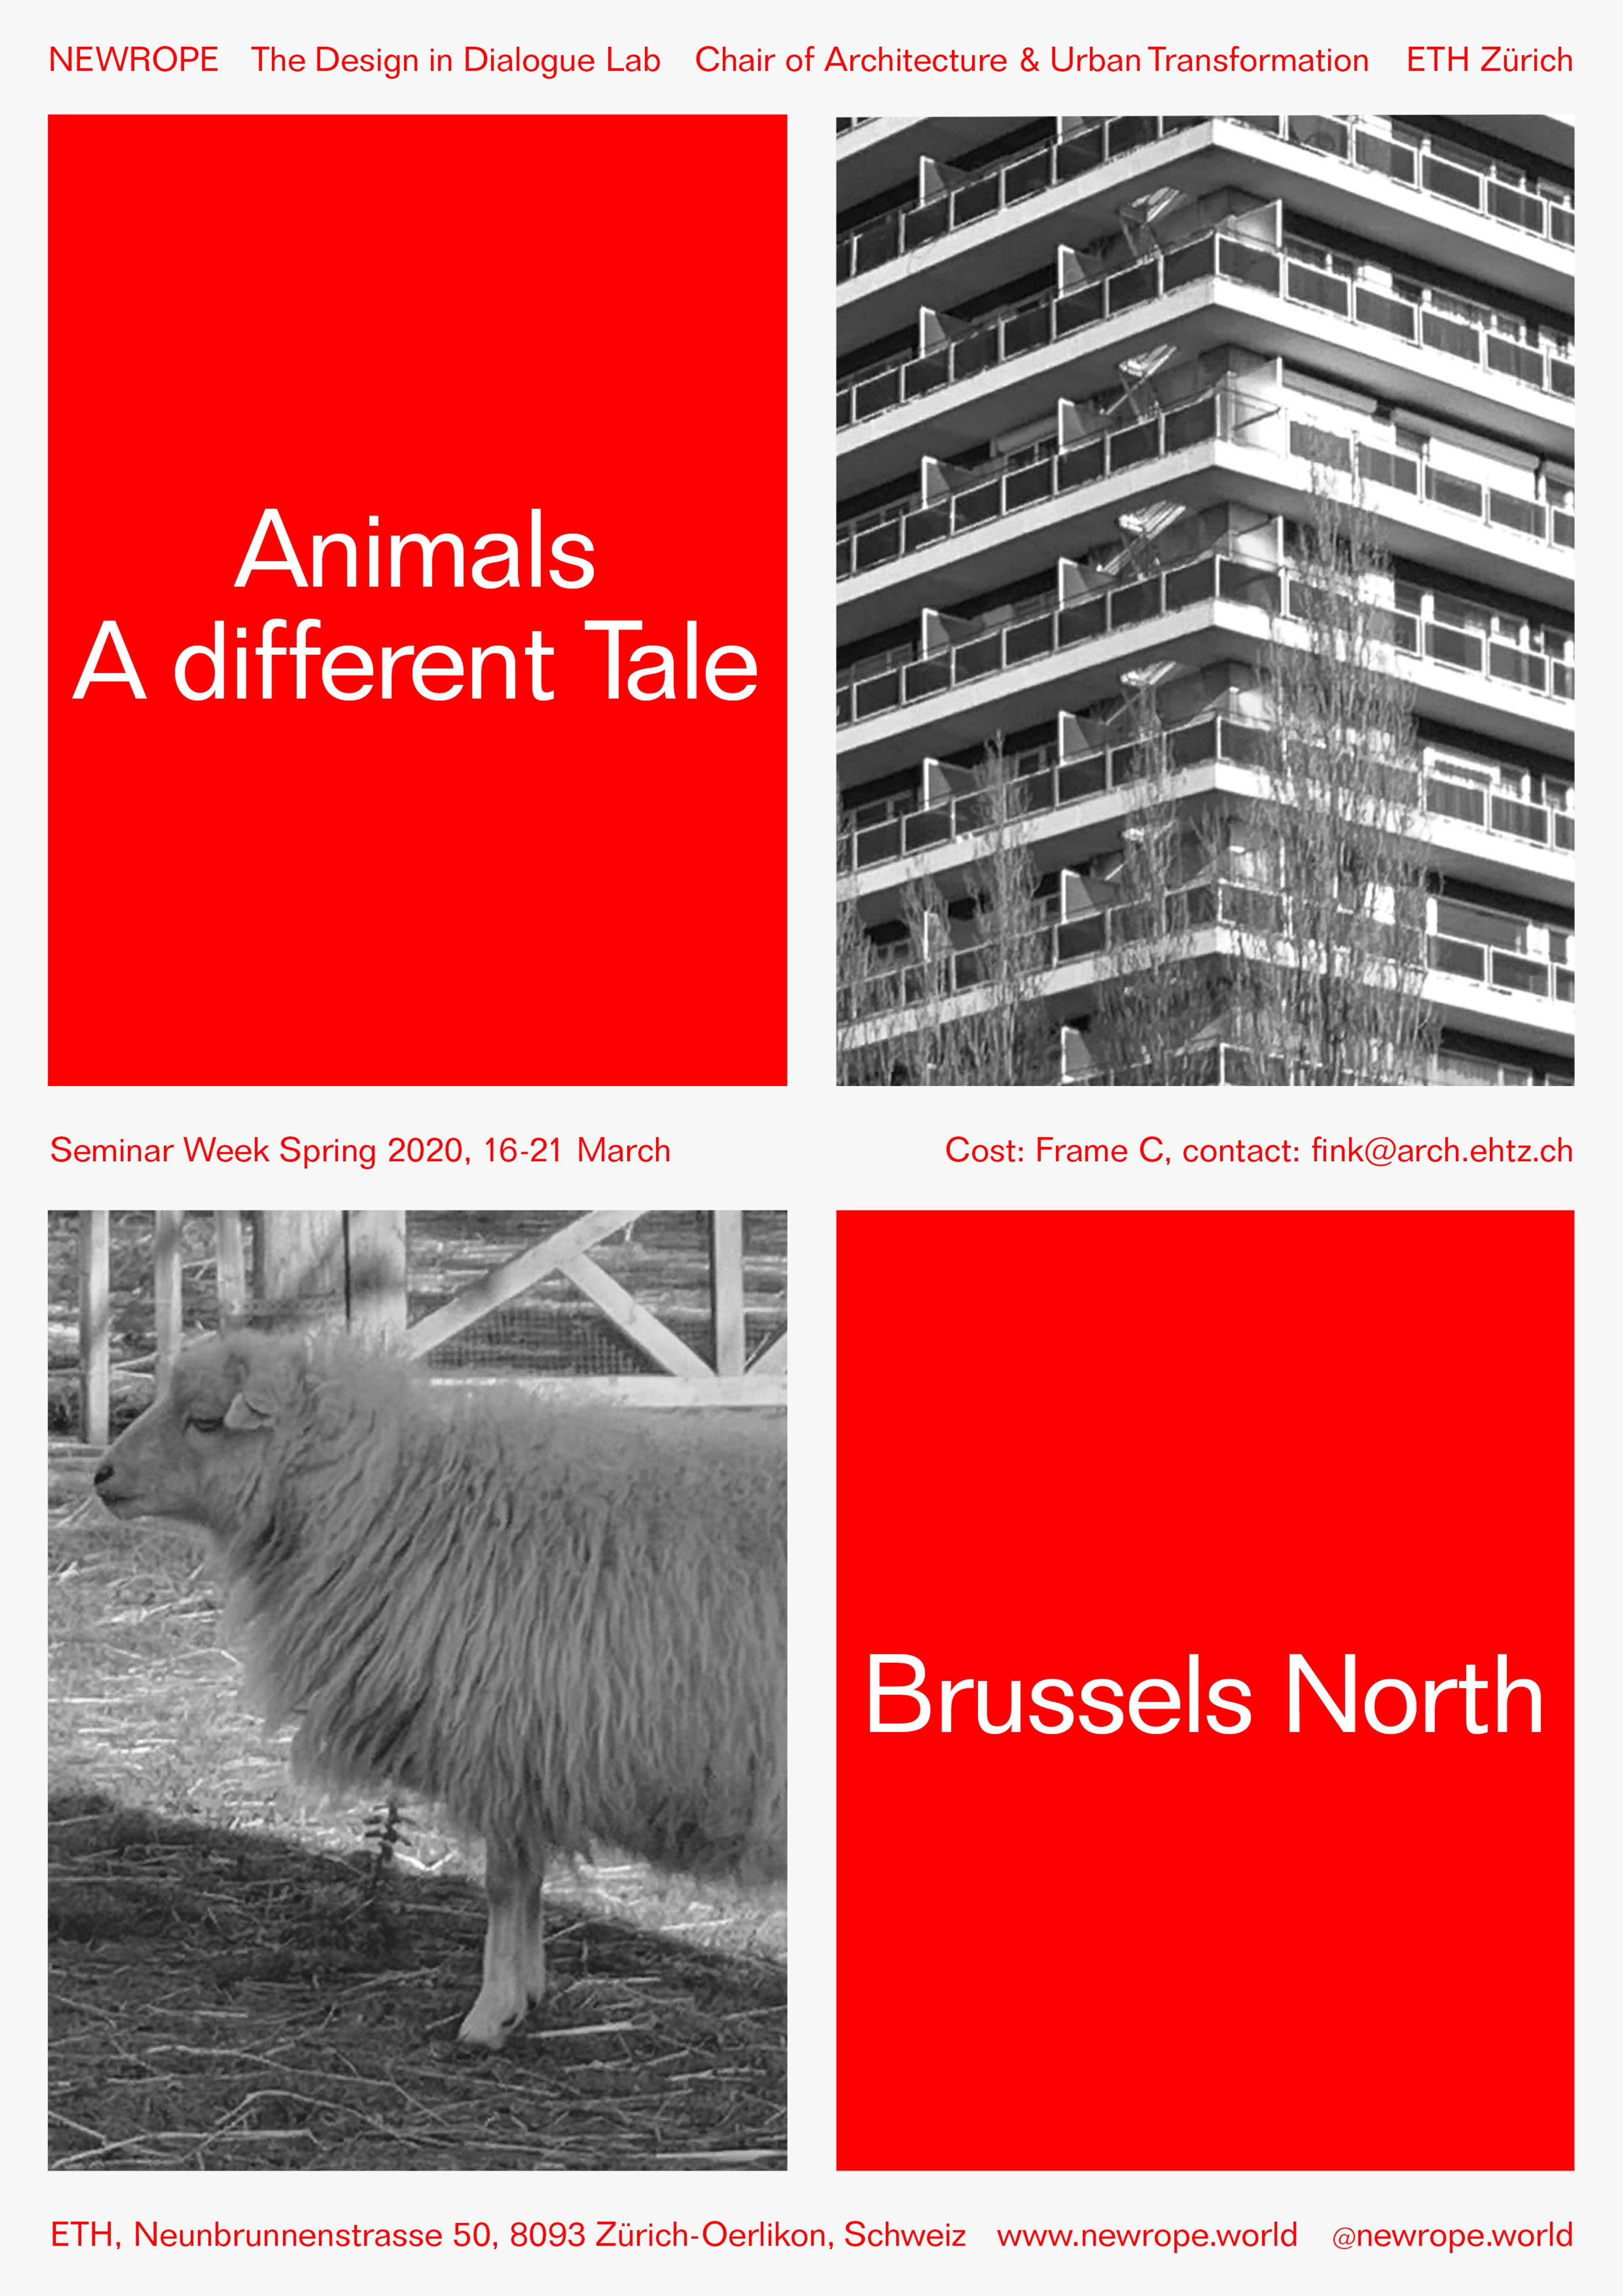 Announcement: Seminar Week, Animals – A different Tale in Brussels North, Spring 2020